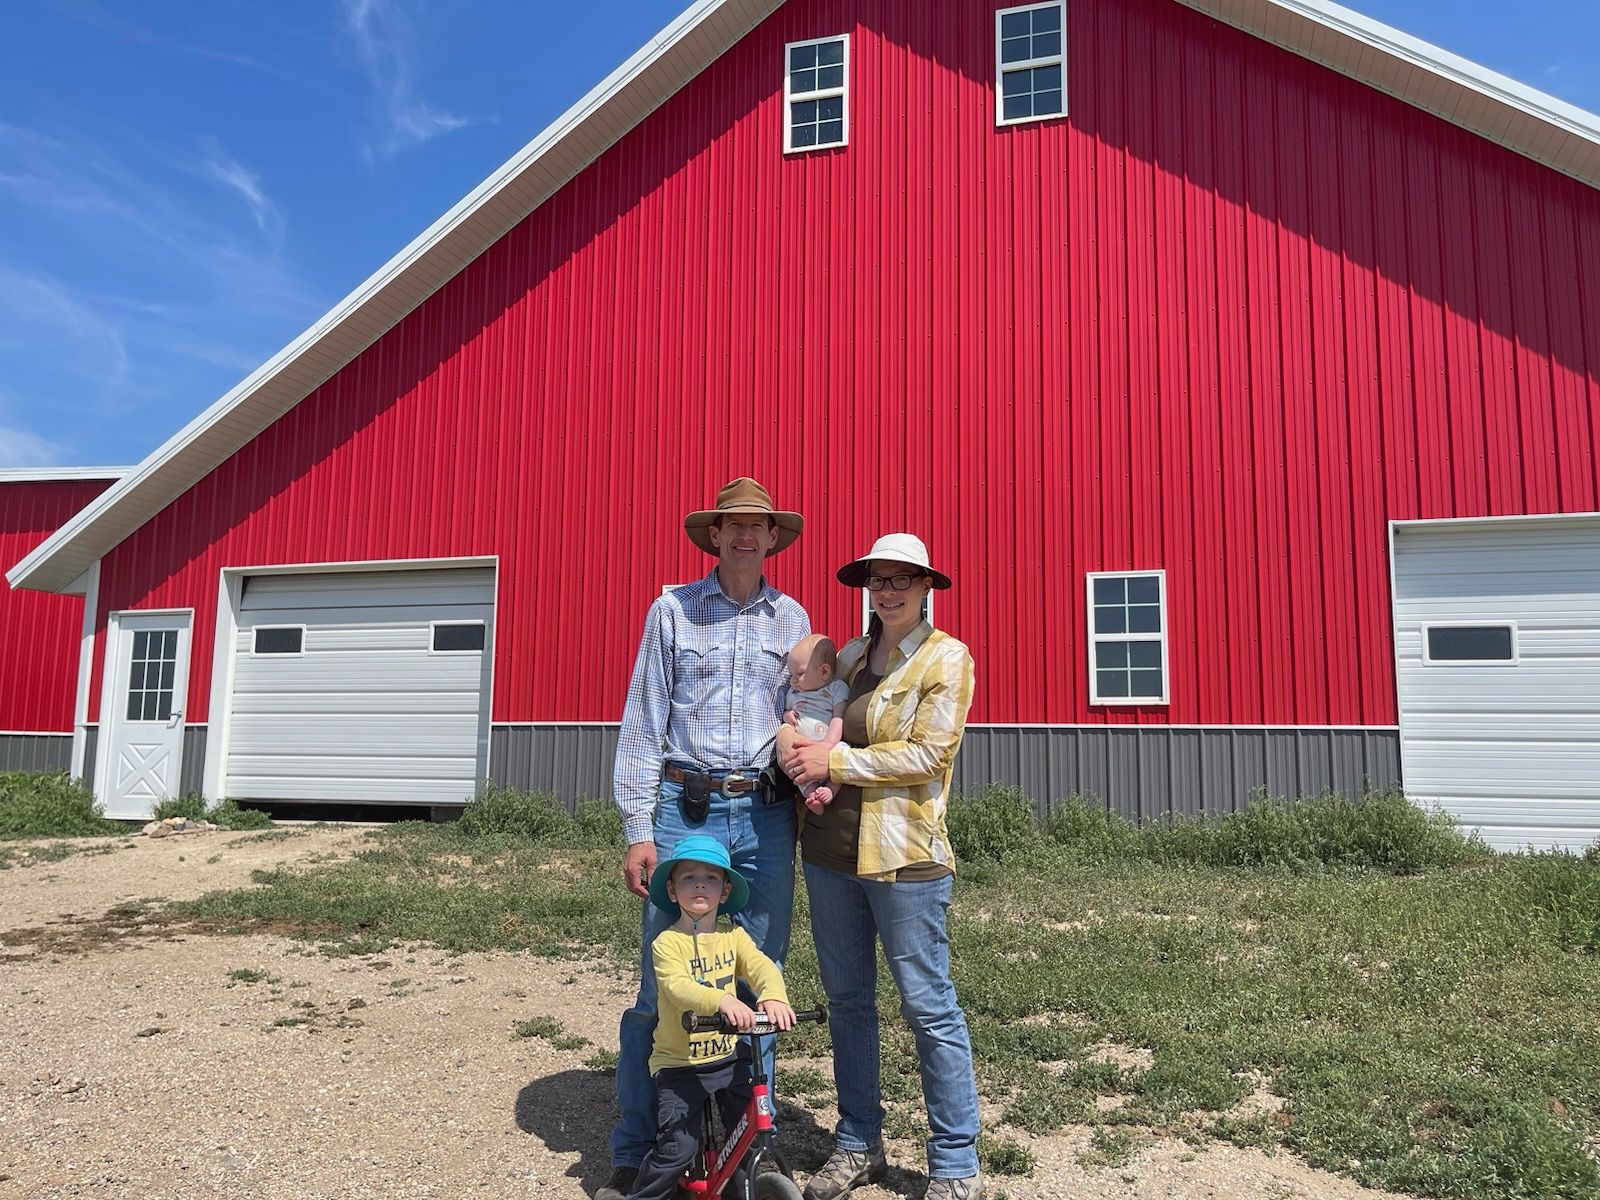 Hyde County rancher Seth Zilverberg and his family